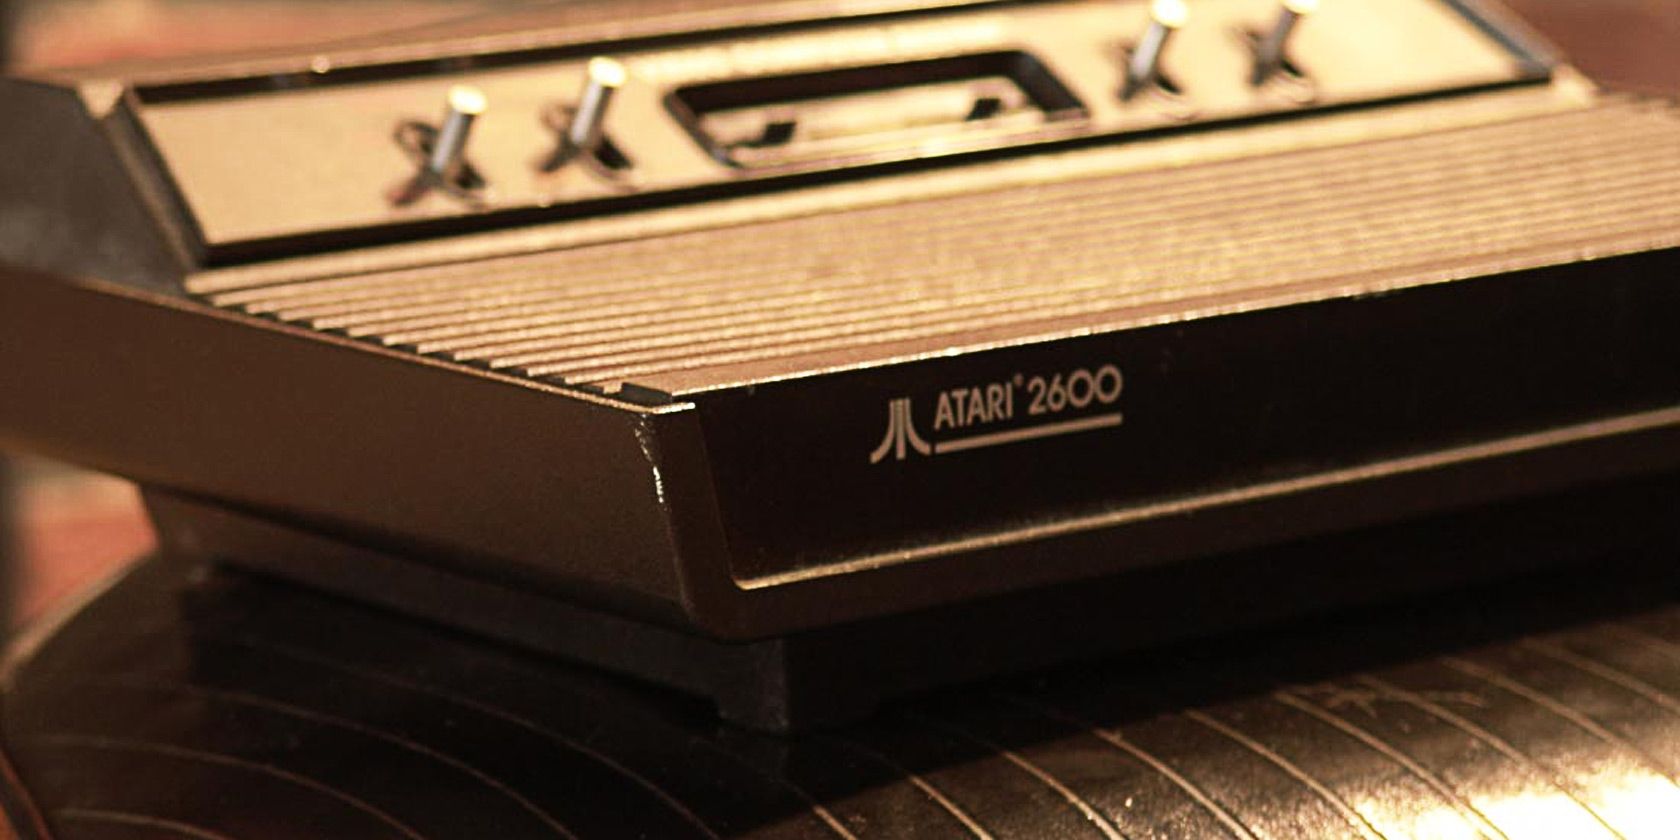 3 Insanely Rare and Valuable Atari 2600 Games You Wish You Owned